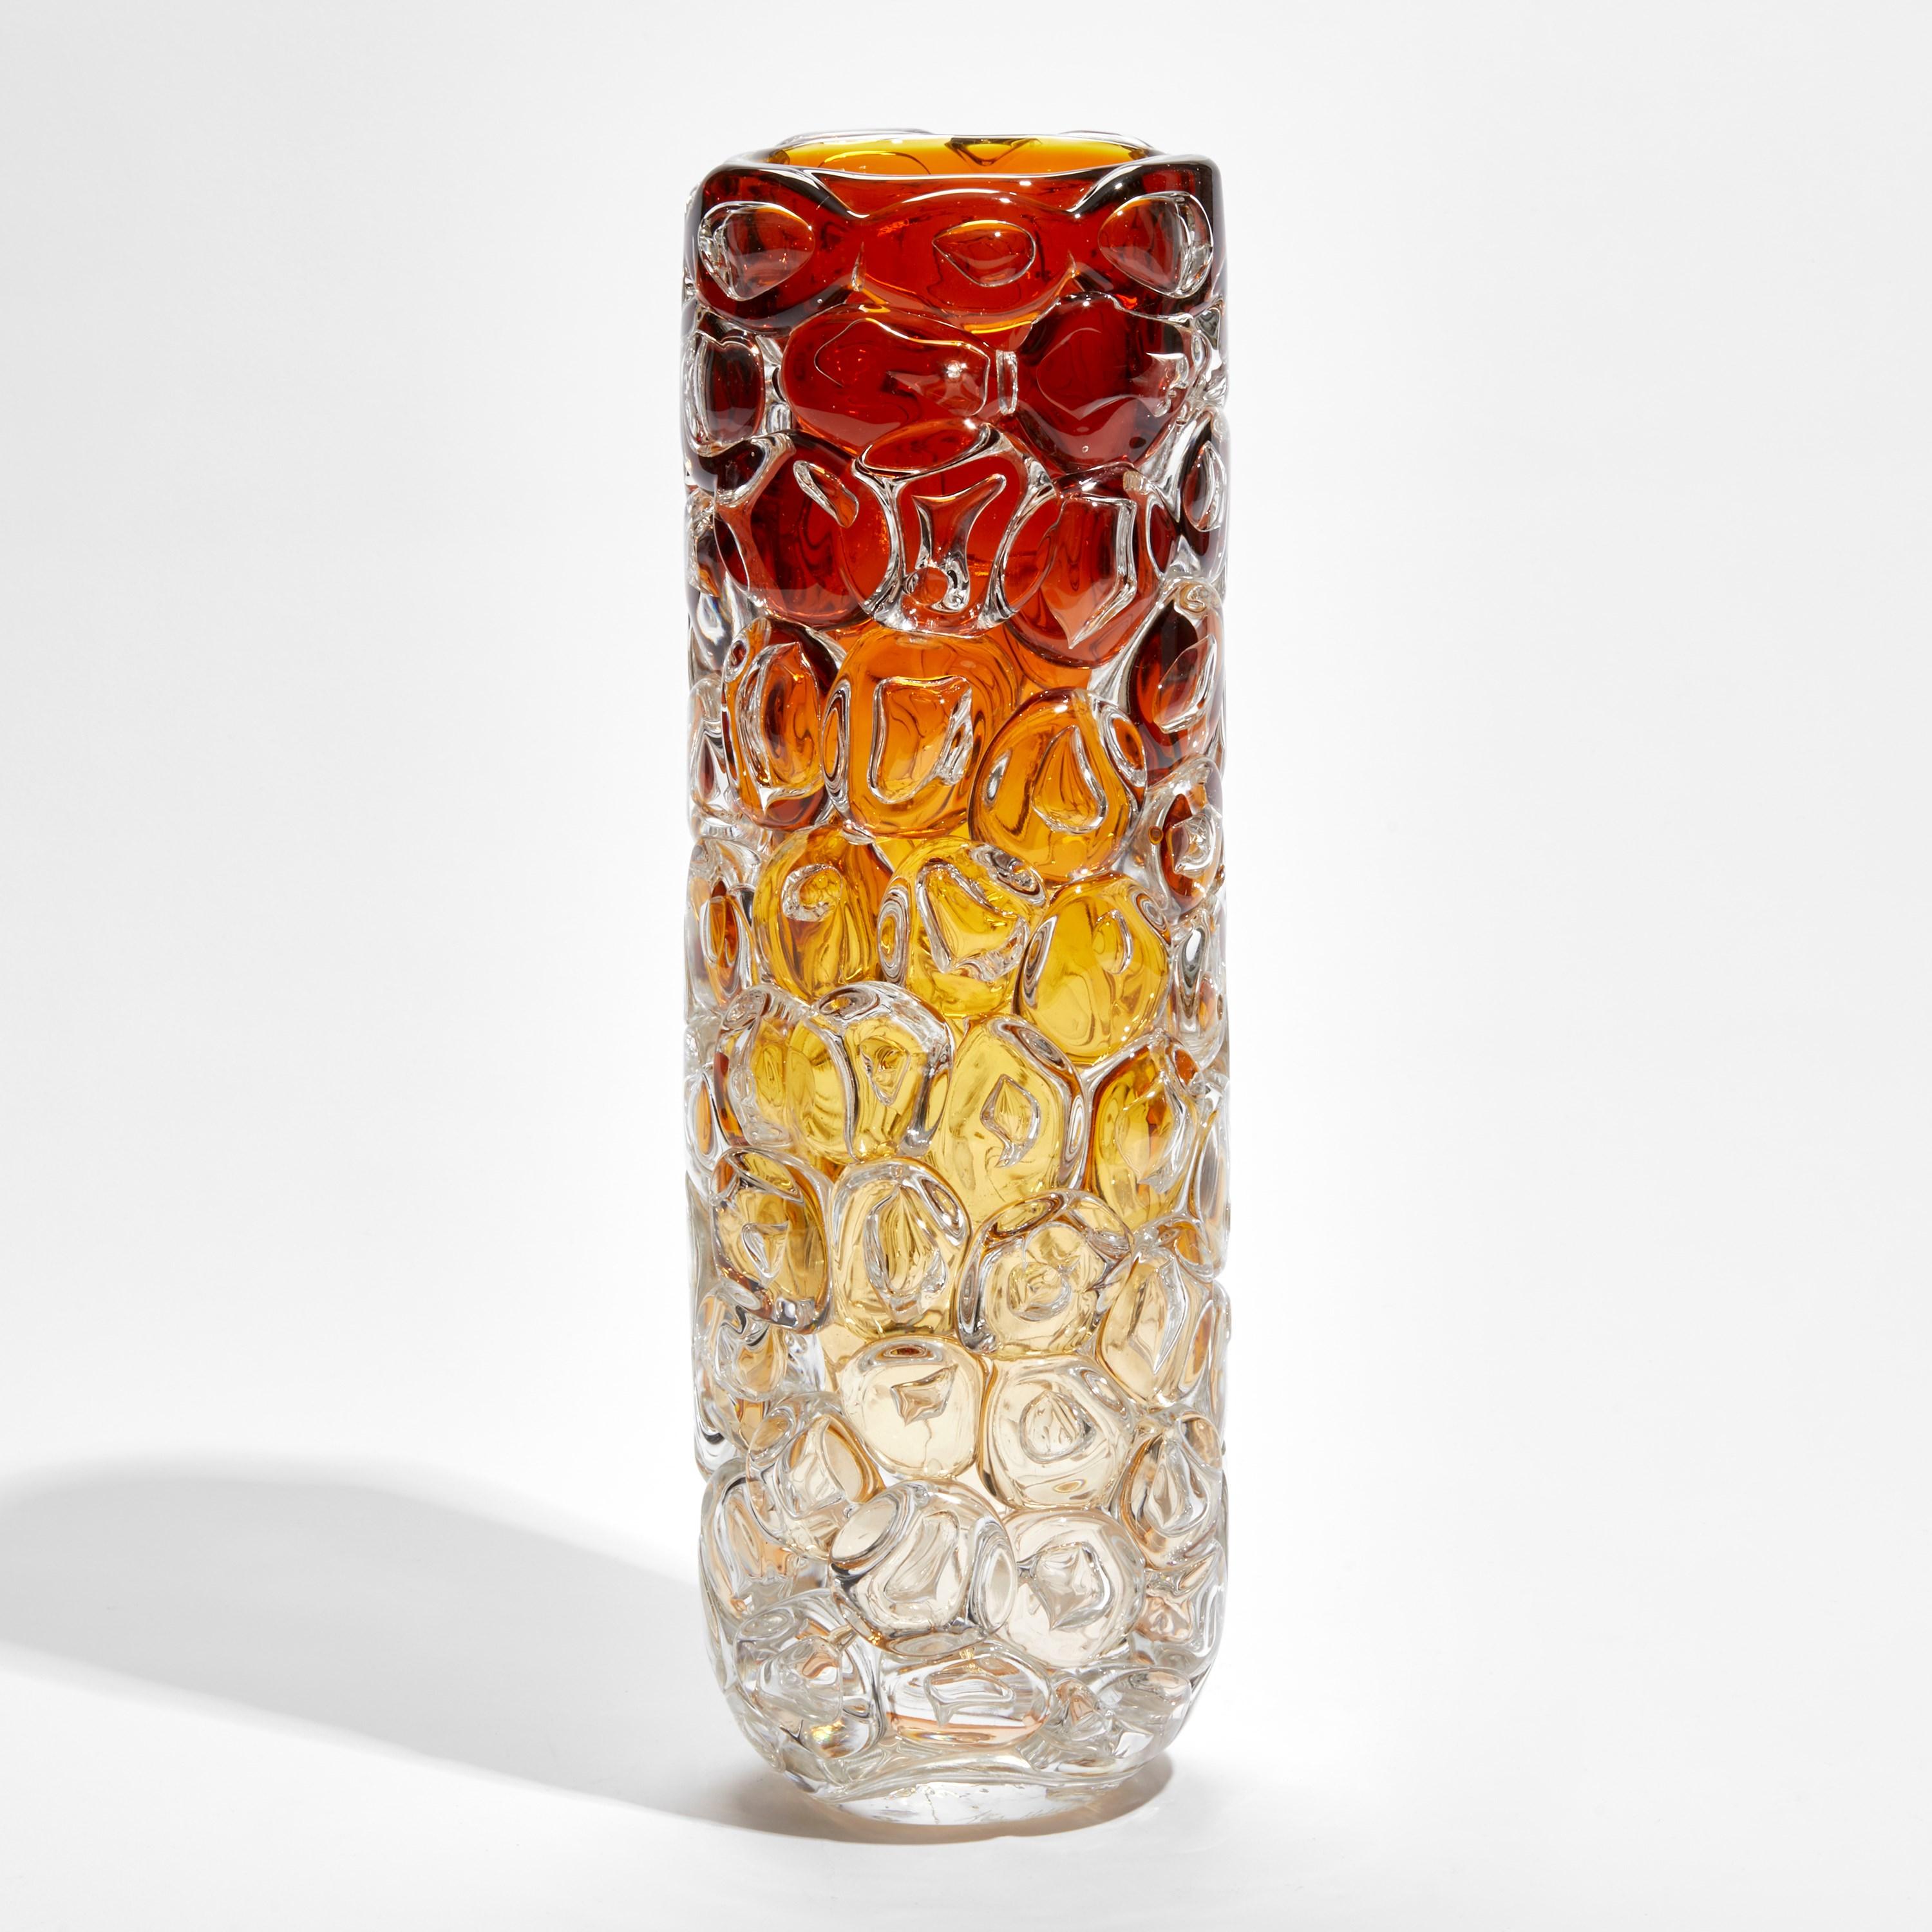 'Bubblewrap in Yellow & Orange' is a handblown and sculpted vase created from rich amber yellow and orange coloured glass by the British artist, Allister Malcolm. Playful yet elegant, Malcolm has formed oversized bubbles on the exterior of this